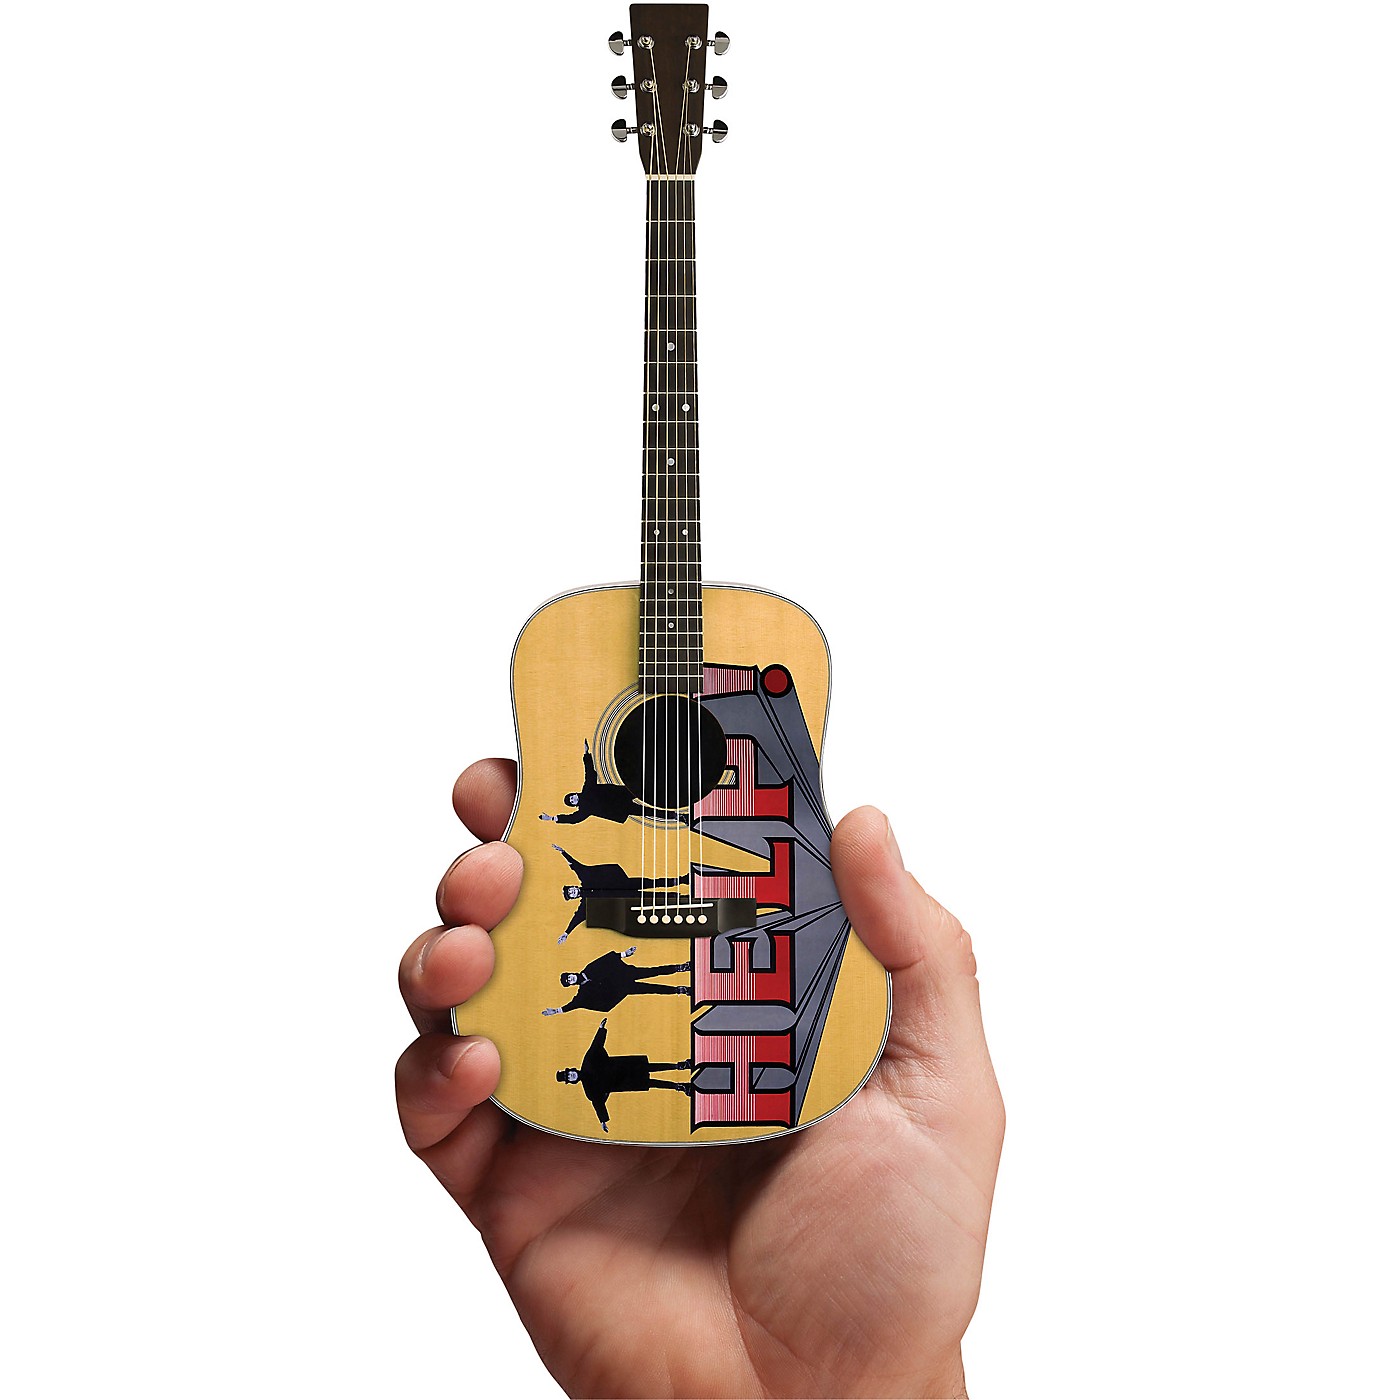 Axe Heaven Help! Fab Four Tribute Acoustic Guitar Officially Licensed Miniature Guitar Replica thumbnail